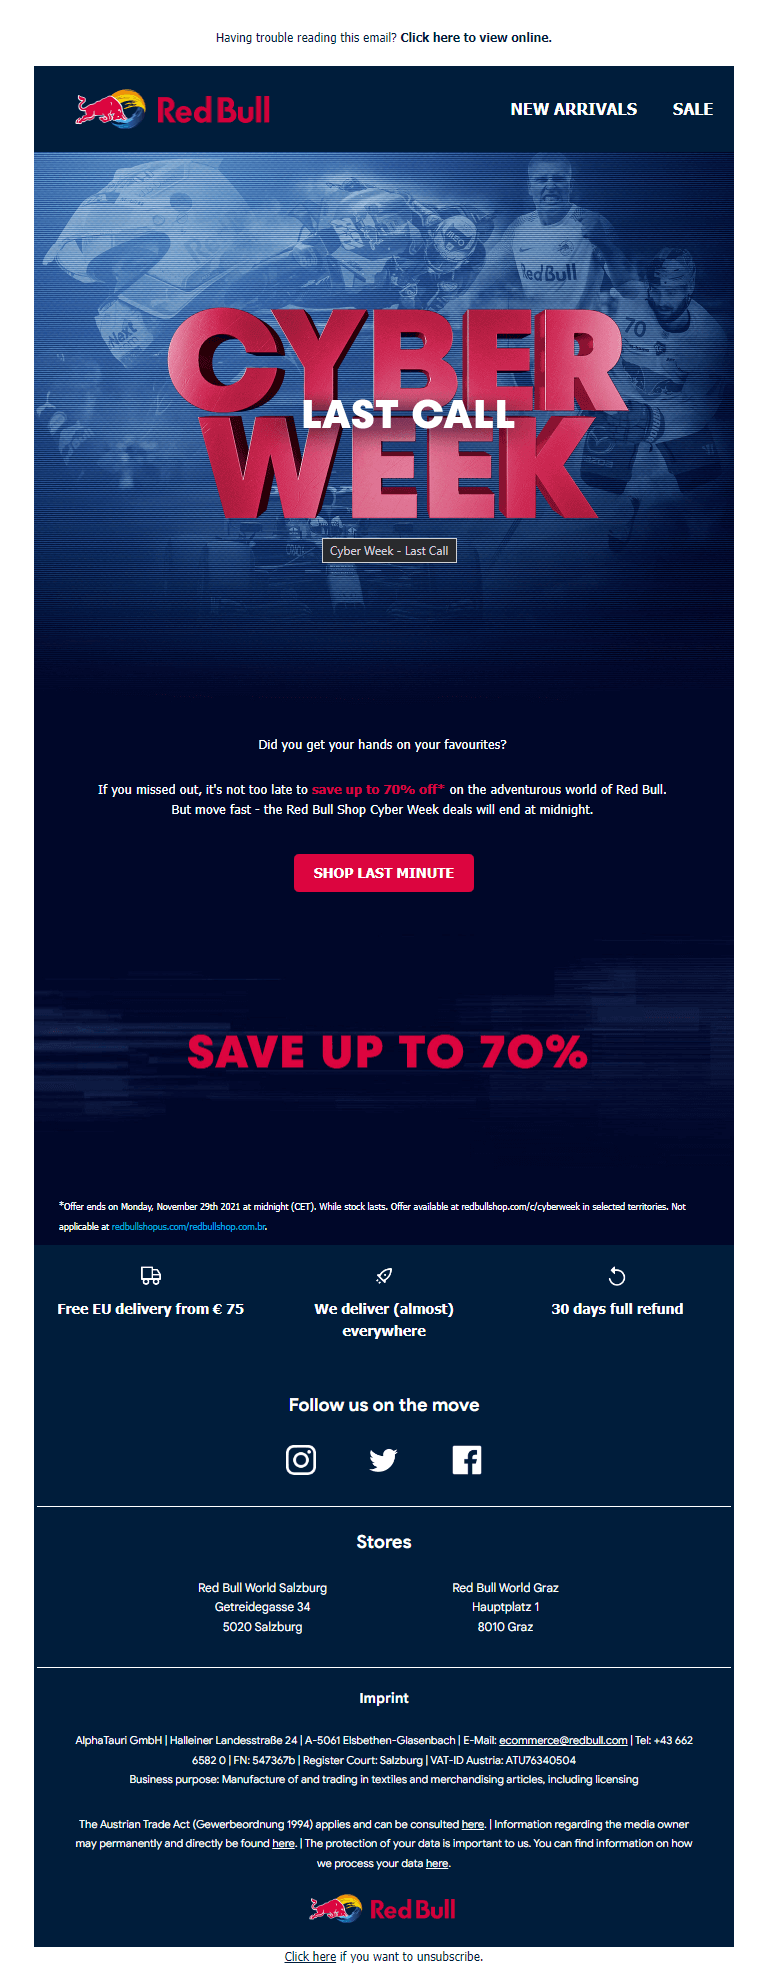 red bull cyber monday offers campaign 